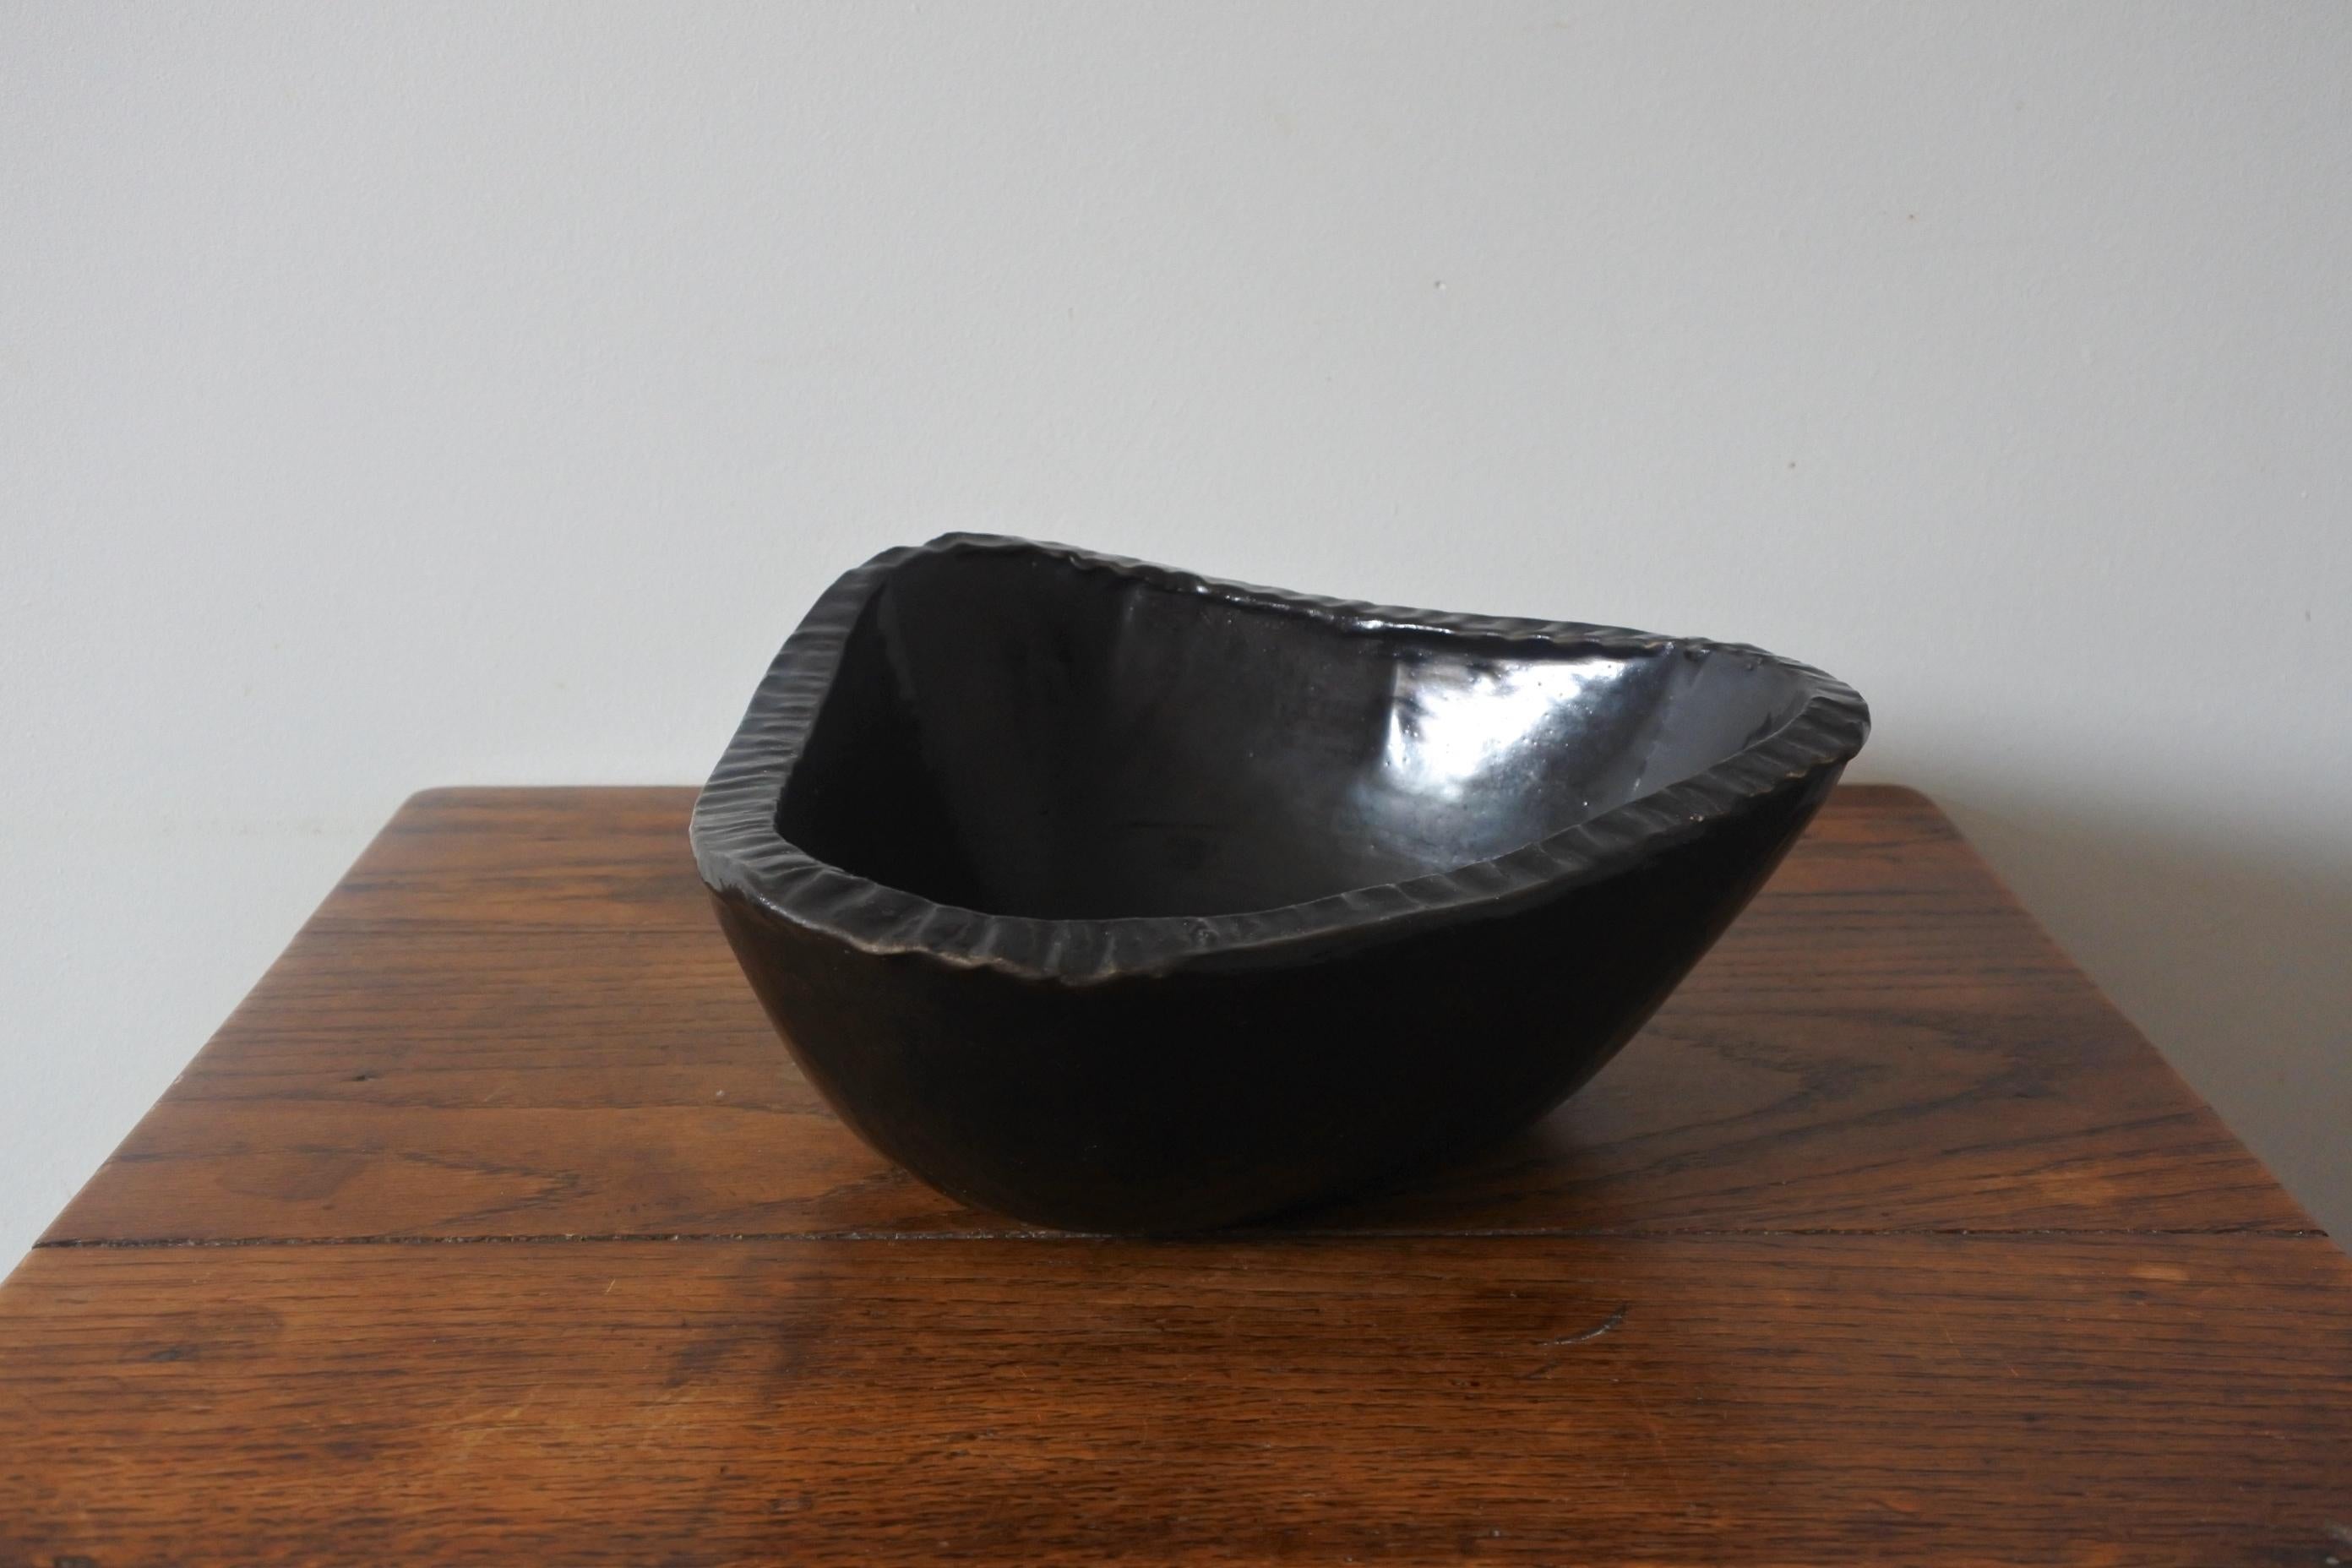 Ceramic triangular freeform dish from France.
Black glazing.
Made by Accolay in the 1950s.
Signed 